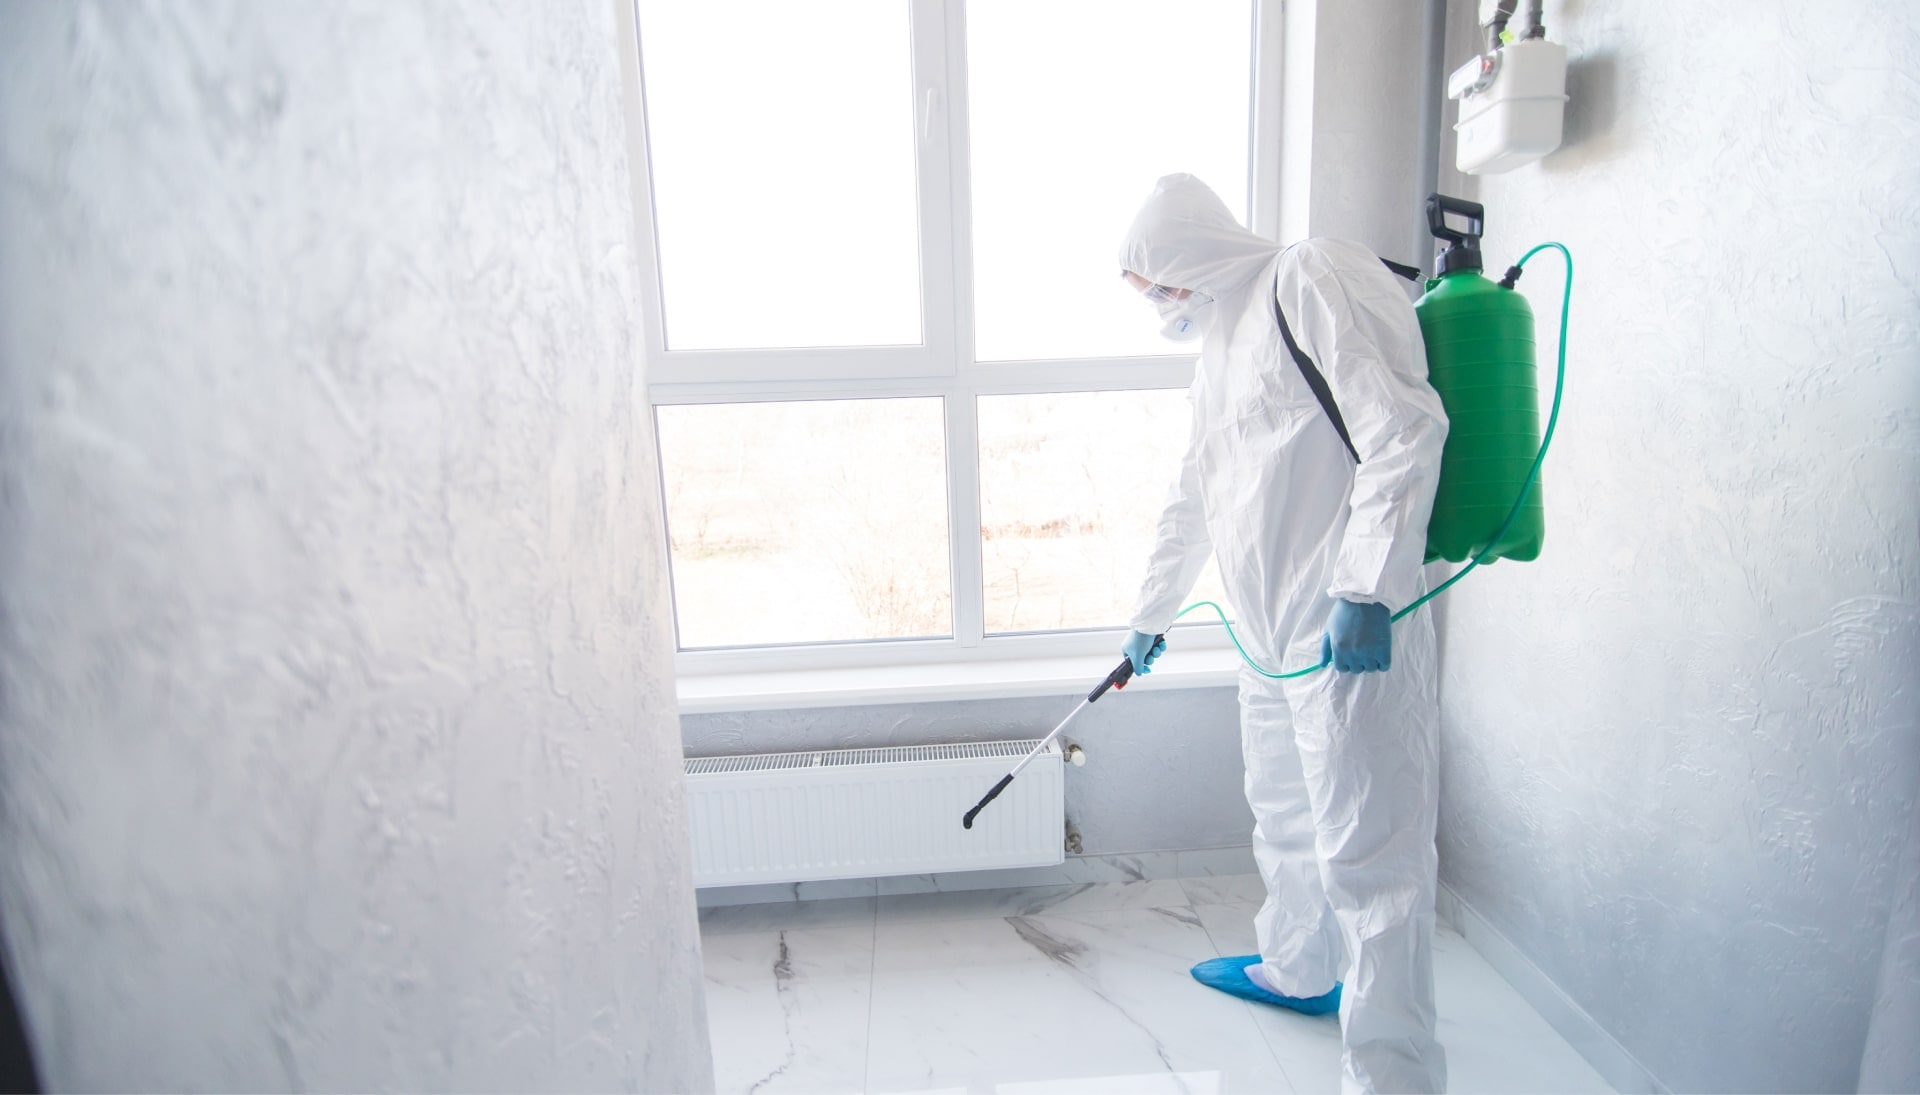 We provide the highest-quality mold inspection, testing, and removal services in the Winter Park, Florida area.